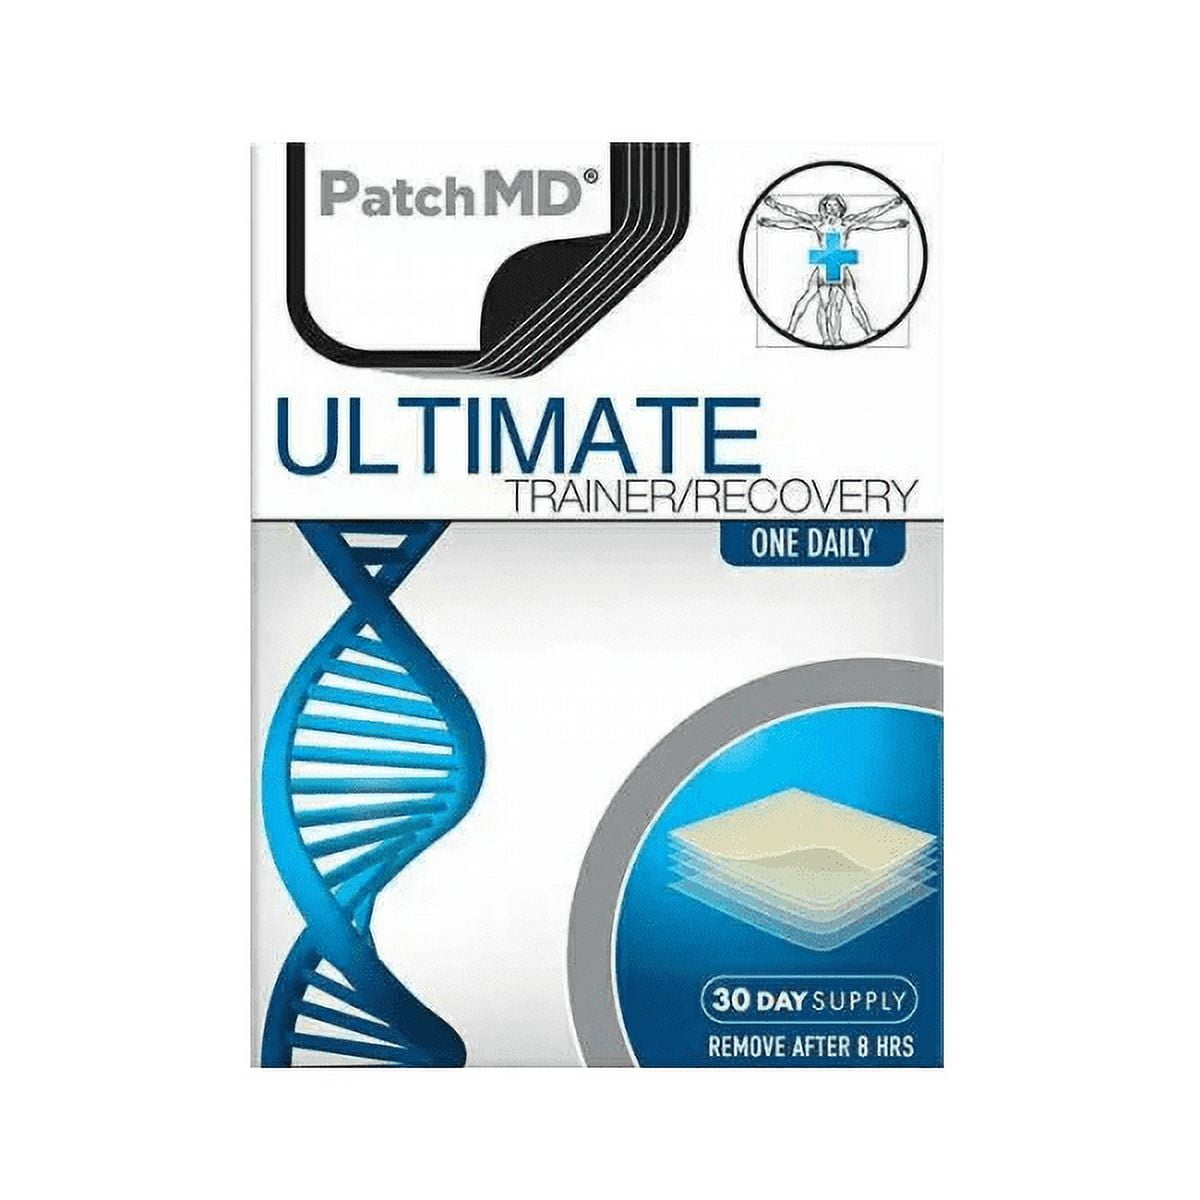 PatchMD - Ultimate Trainer & Recovery Topical Patch - 30 Day Supply